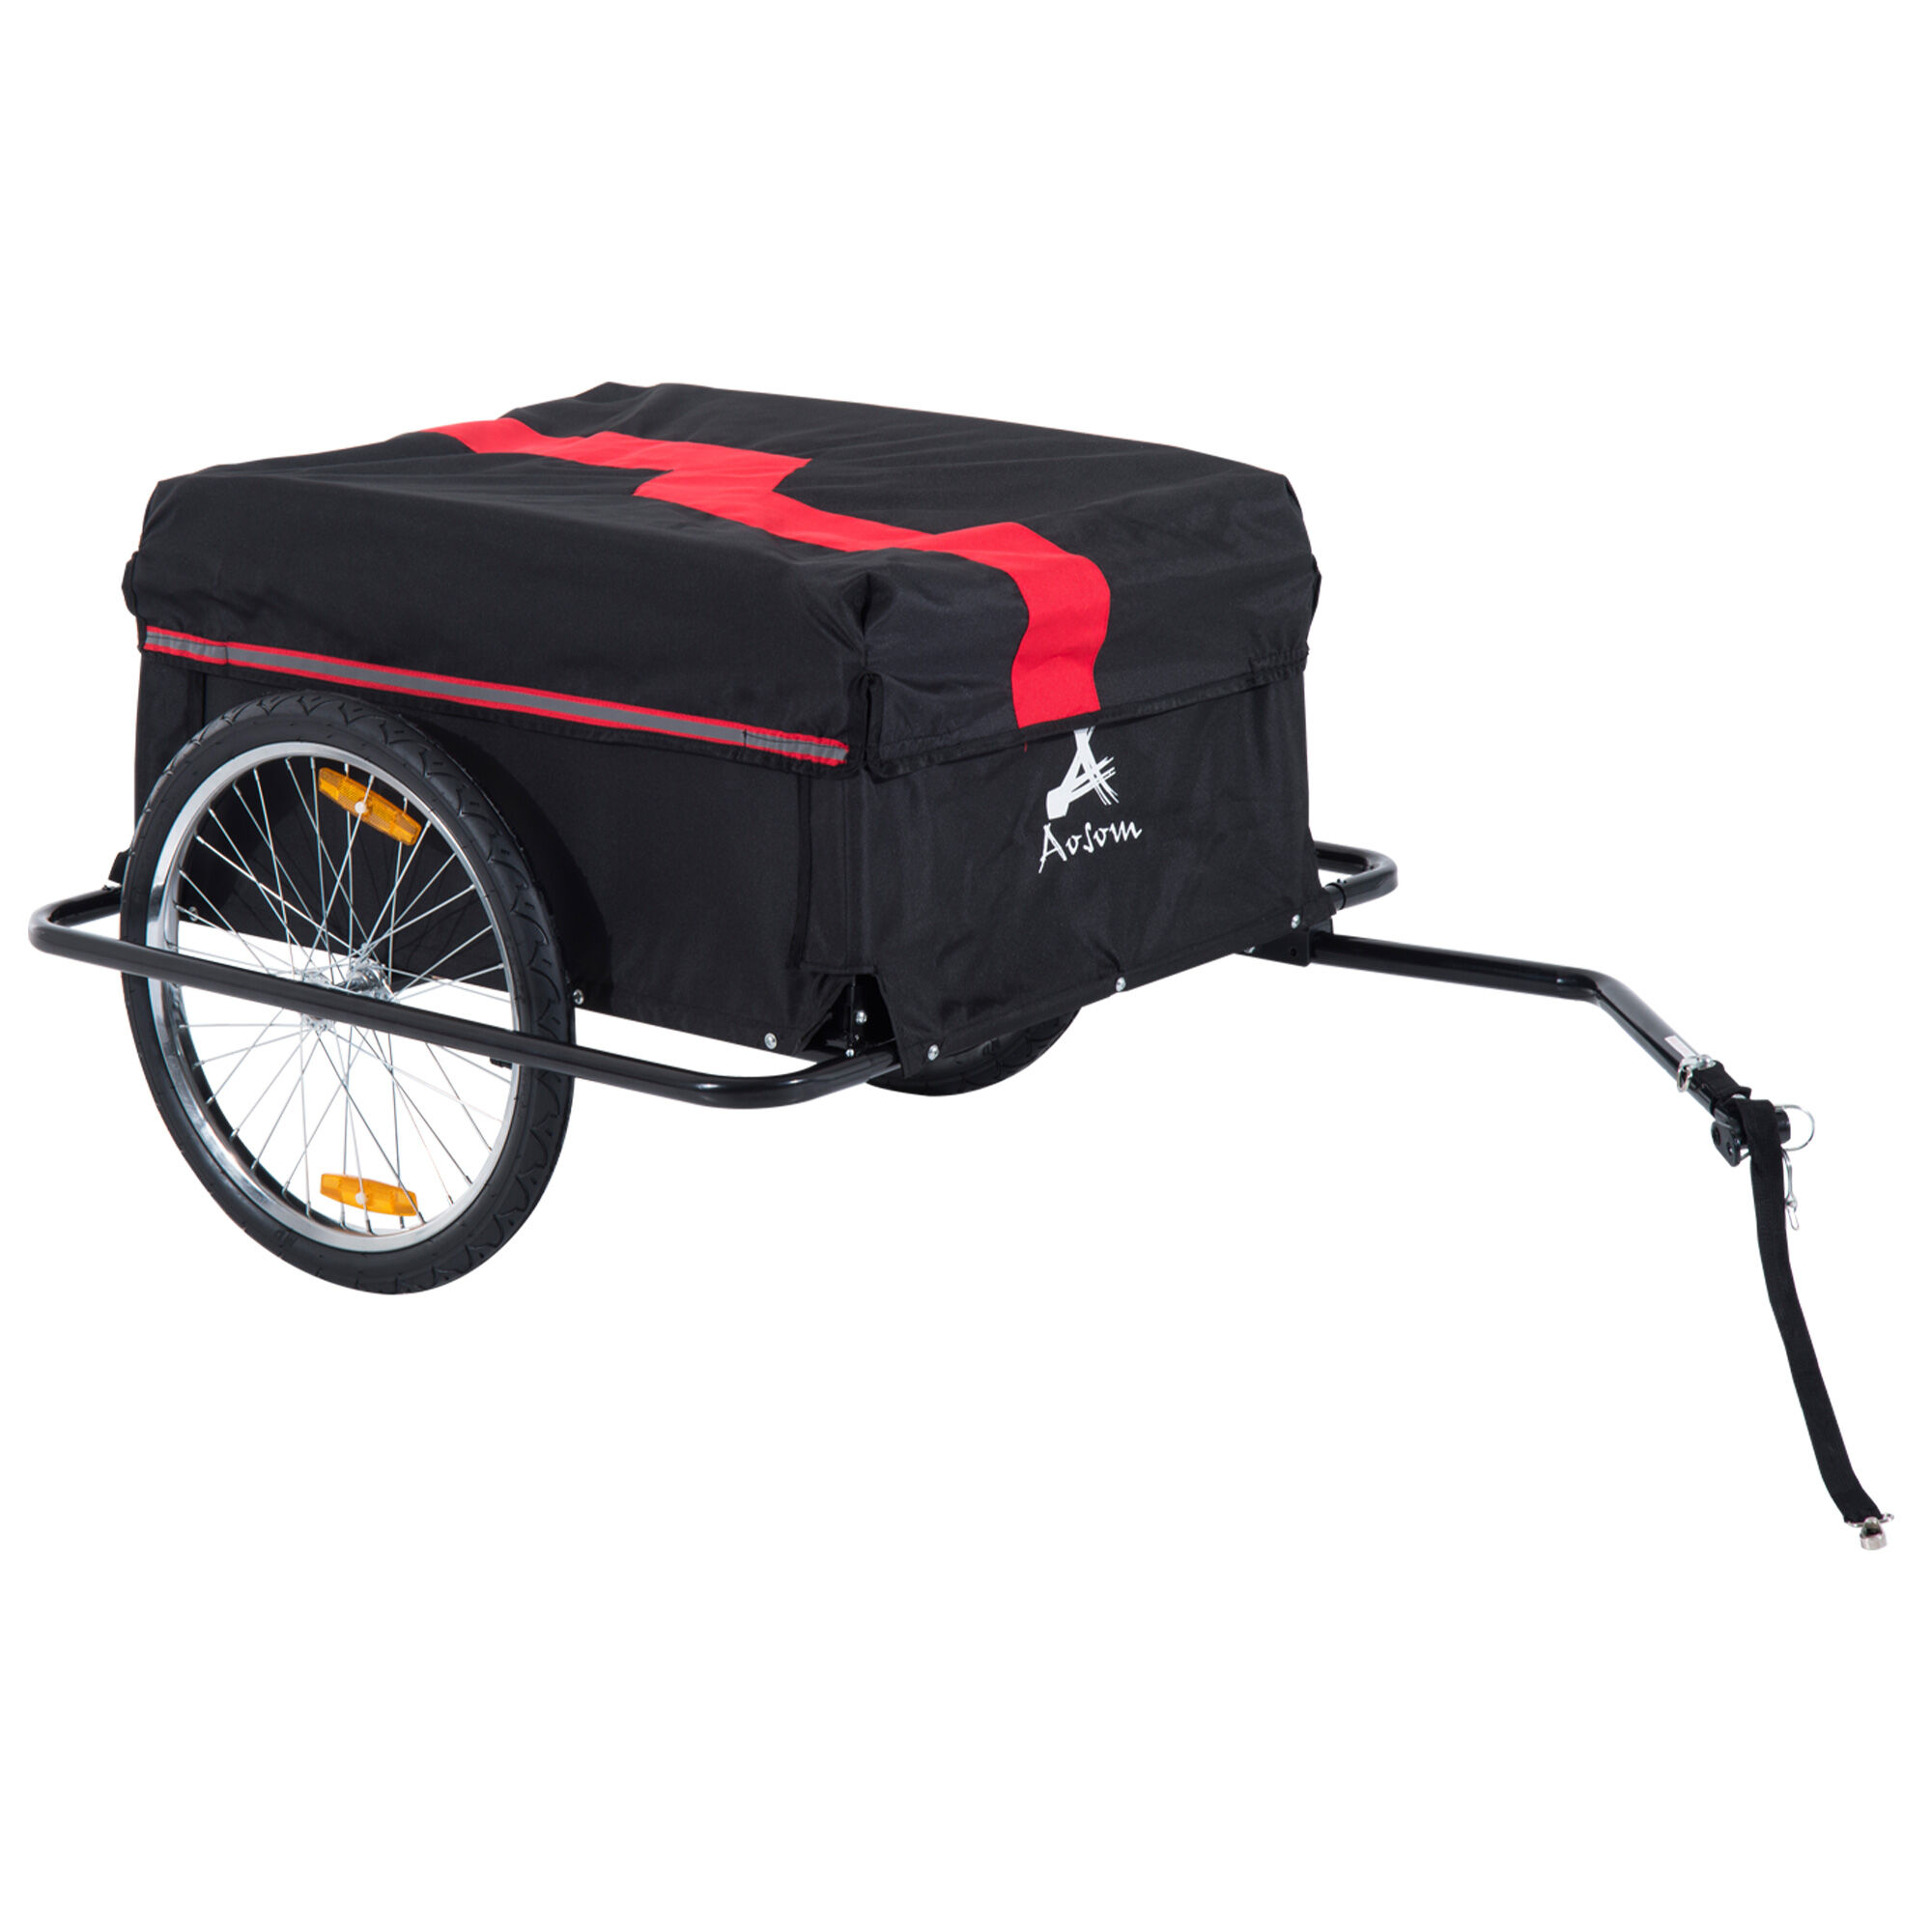 Aosom Bicycle Cargo Trailer, Two-Wheel Bike Luggage Wagon, with Removable Cover, Red, Versatile Use   Aosom.com